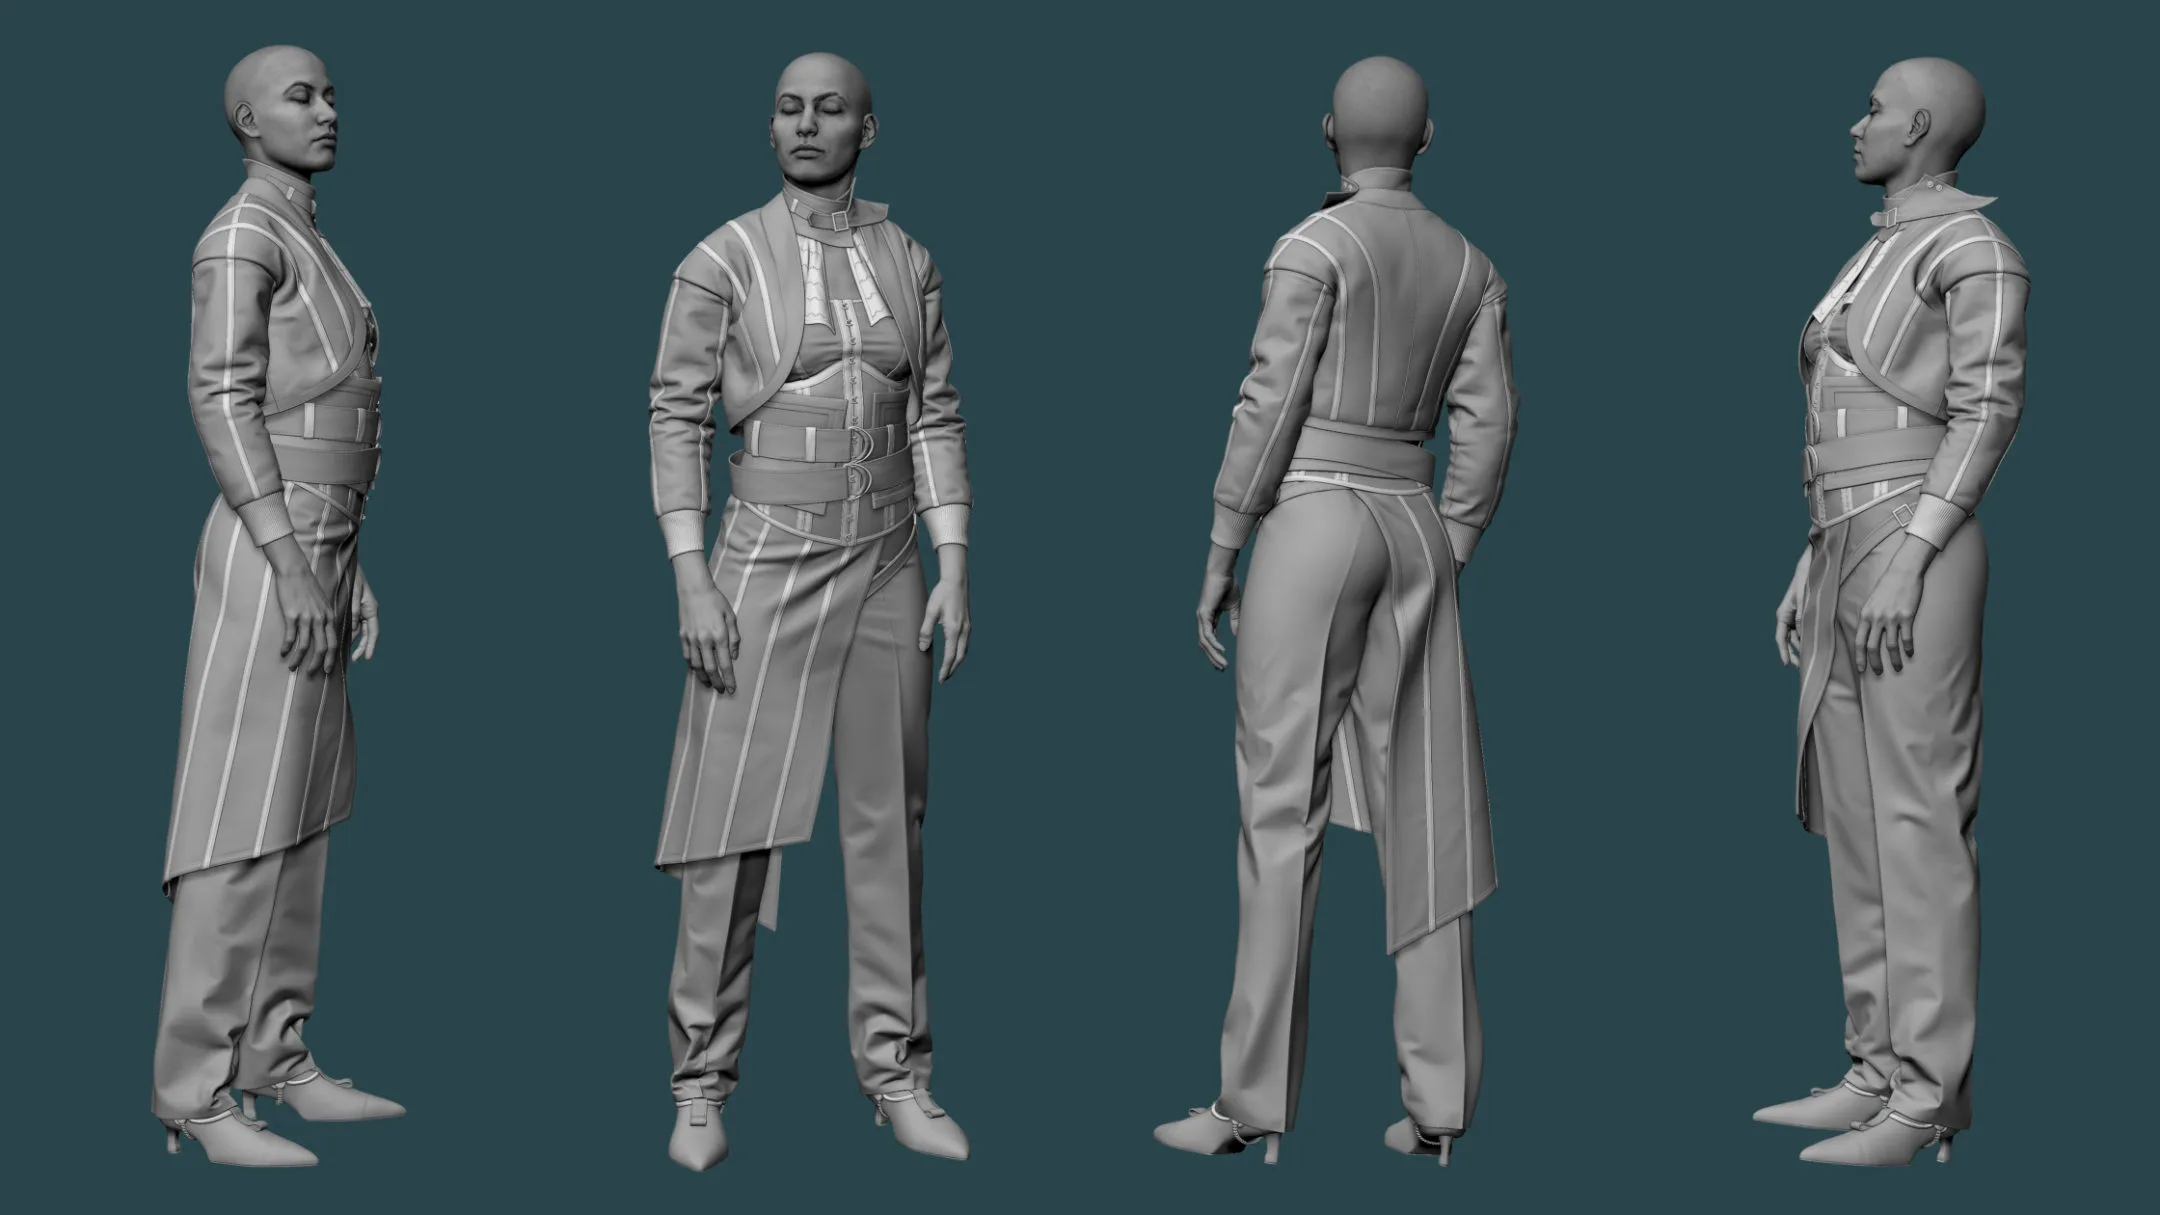 From Marvelous Designer To ZBrush: The Missing Link